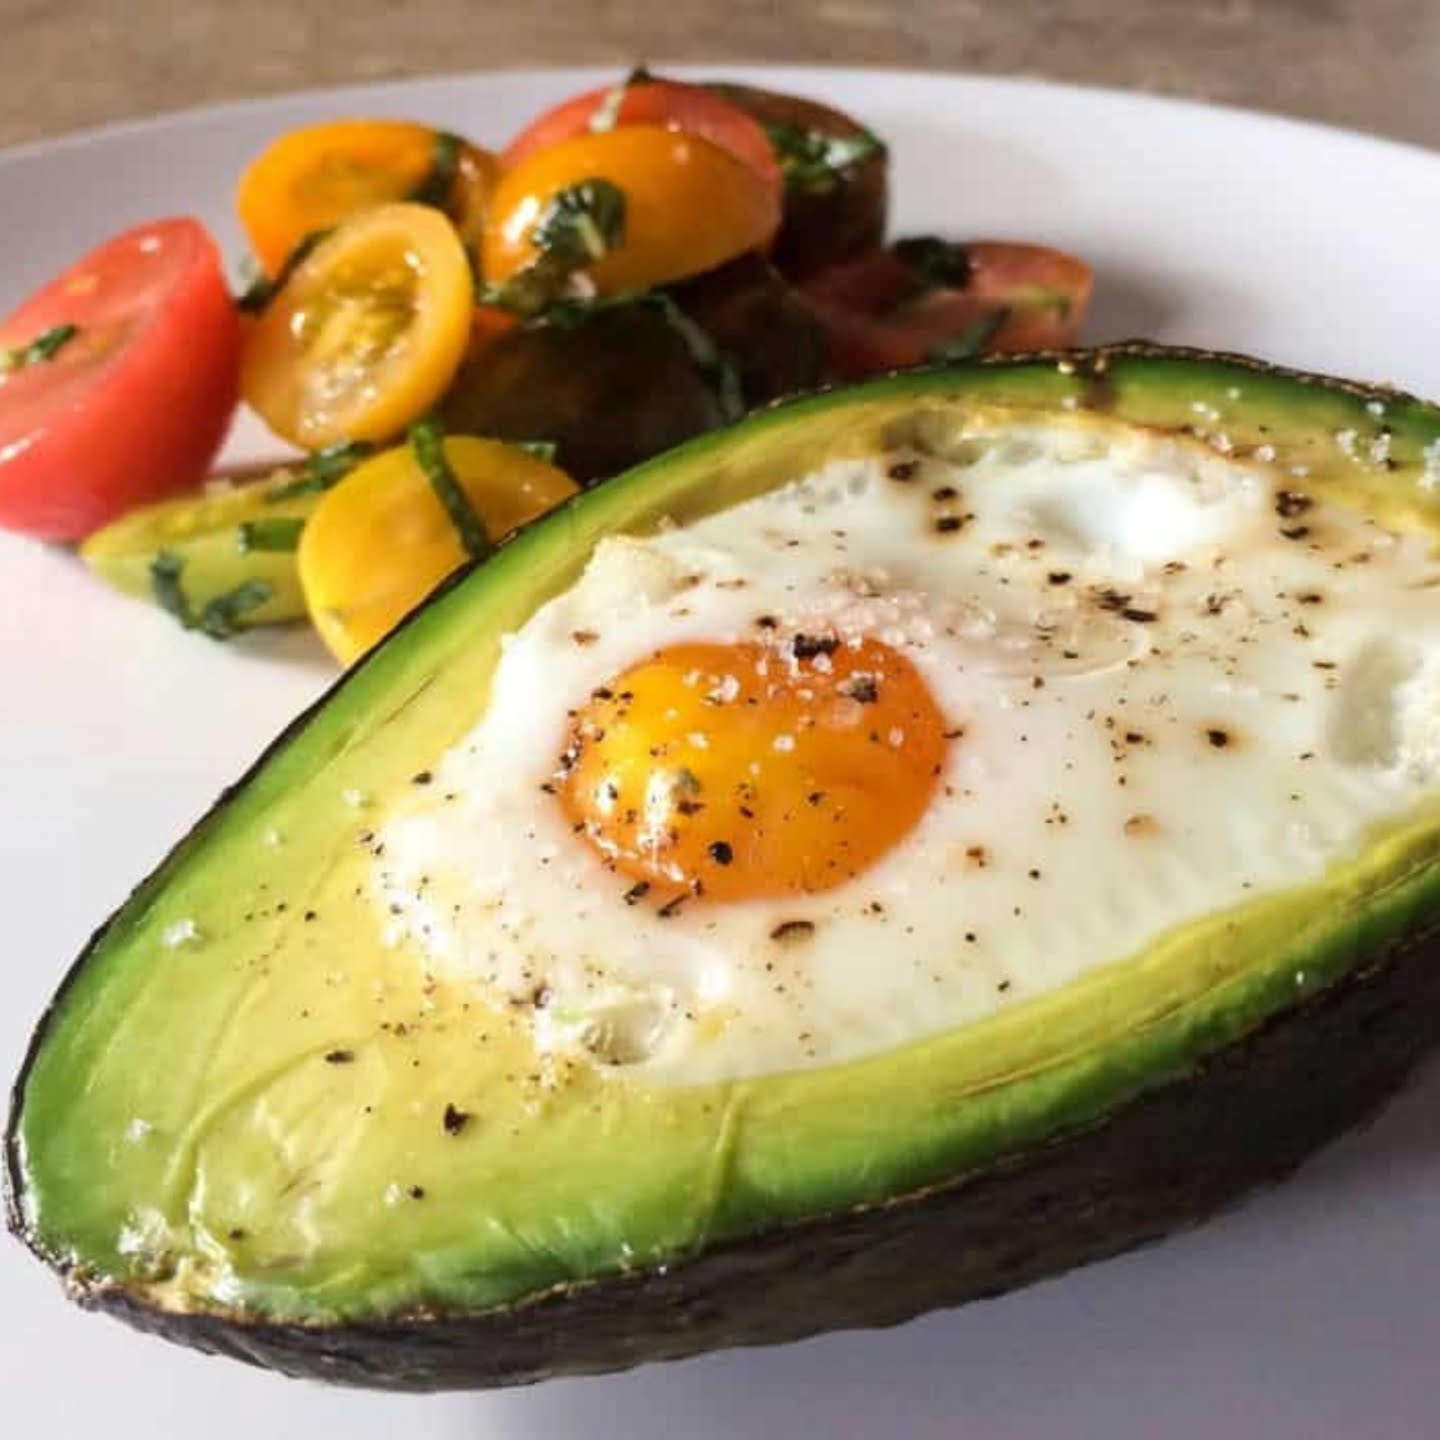 Baked eggs and avocado